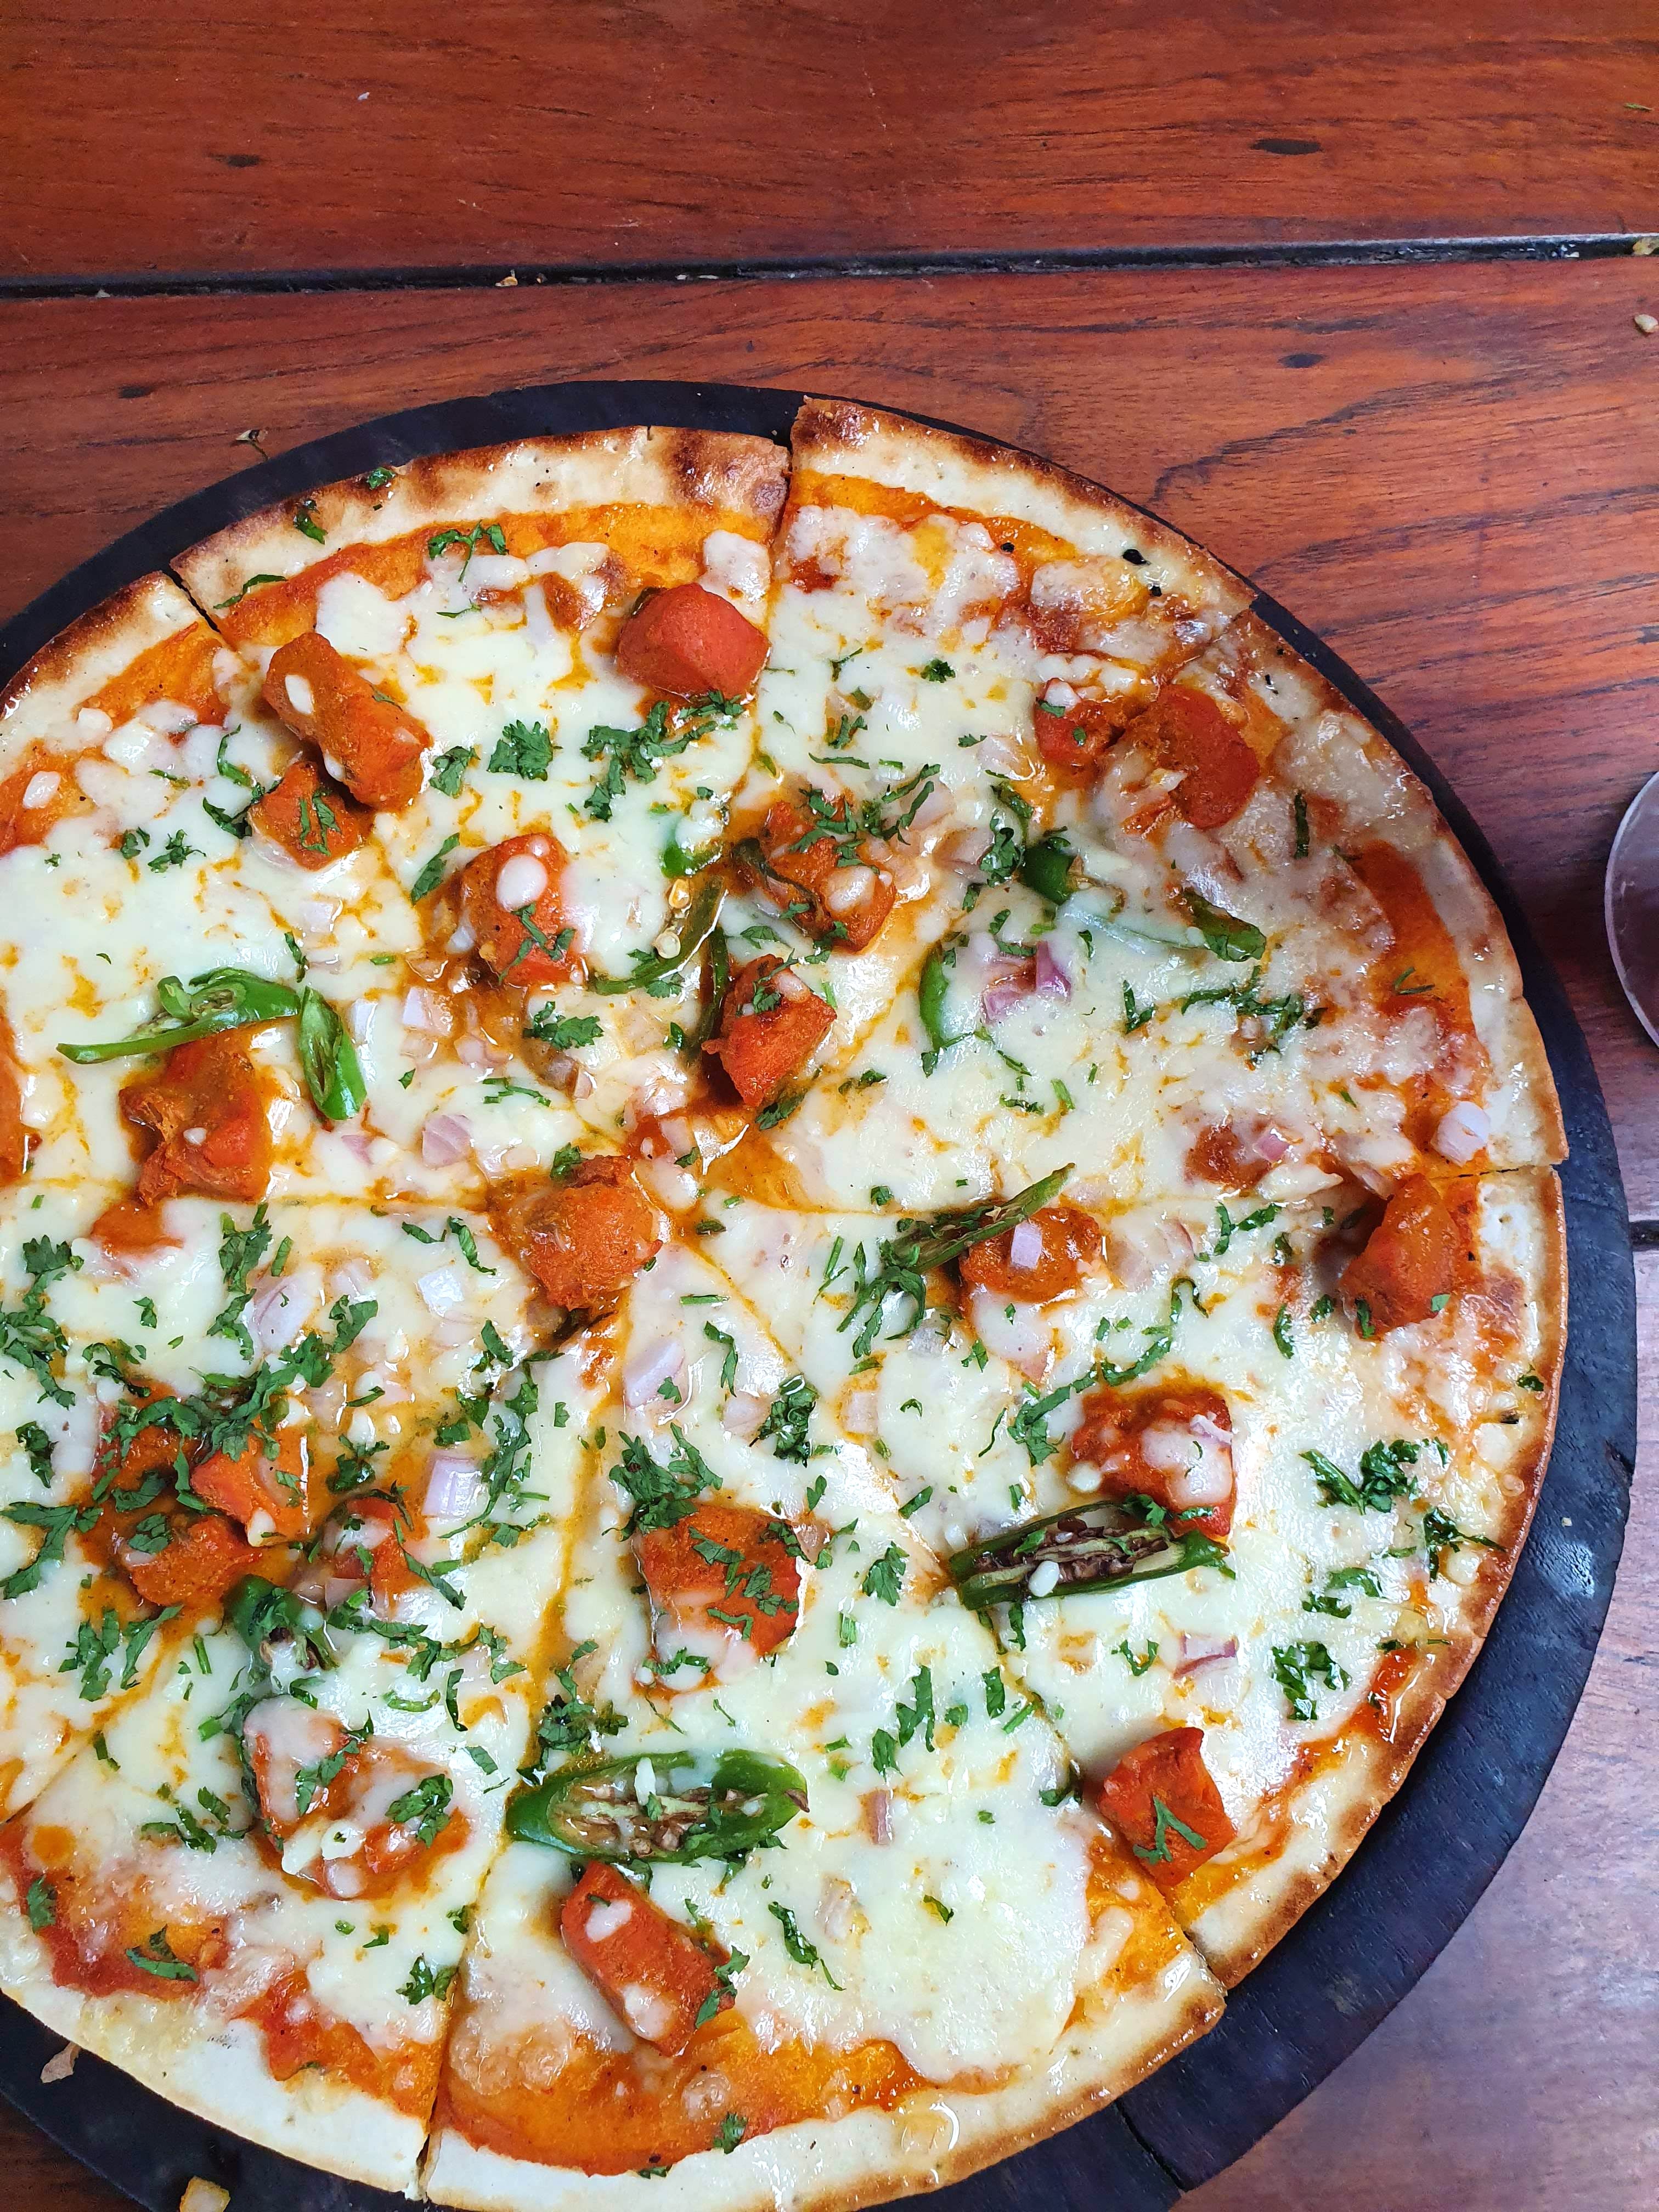 Dish,Food,Cuisine,Pizza,Pizza cheese,California-style pizza,Flatbread,Ingredient,Goat cheese,Comfort food